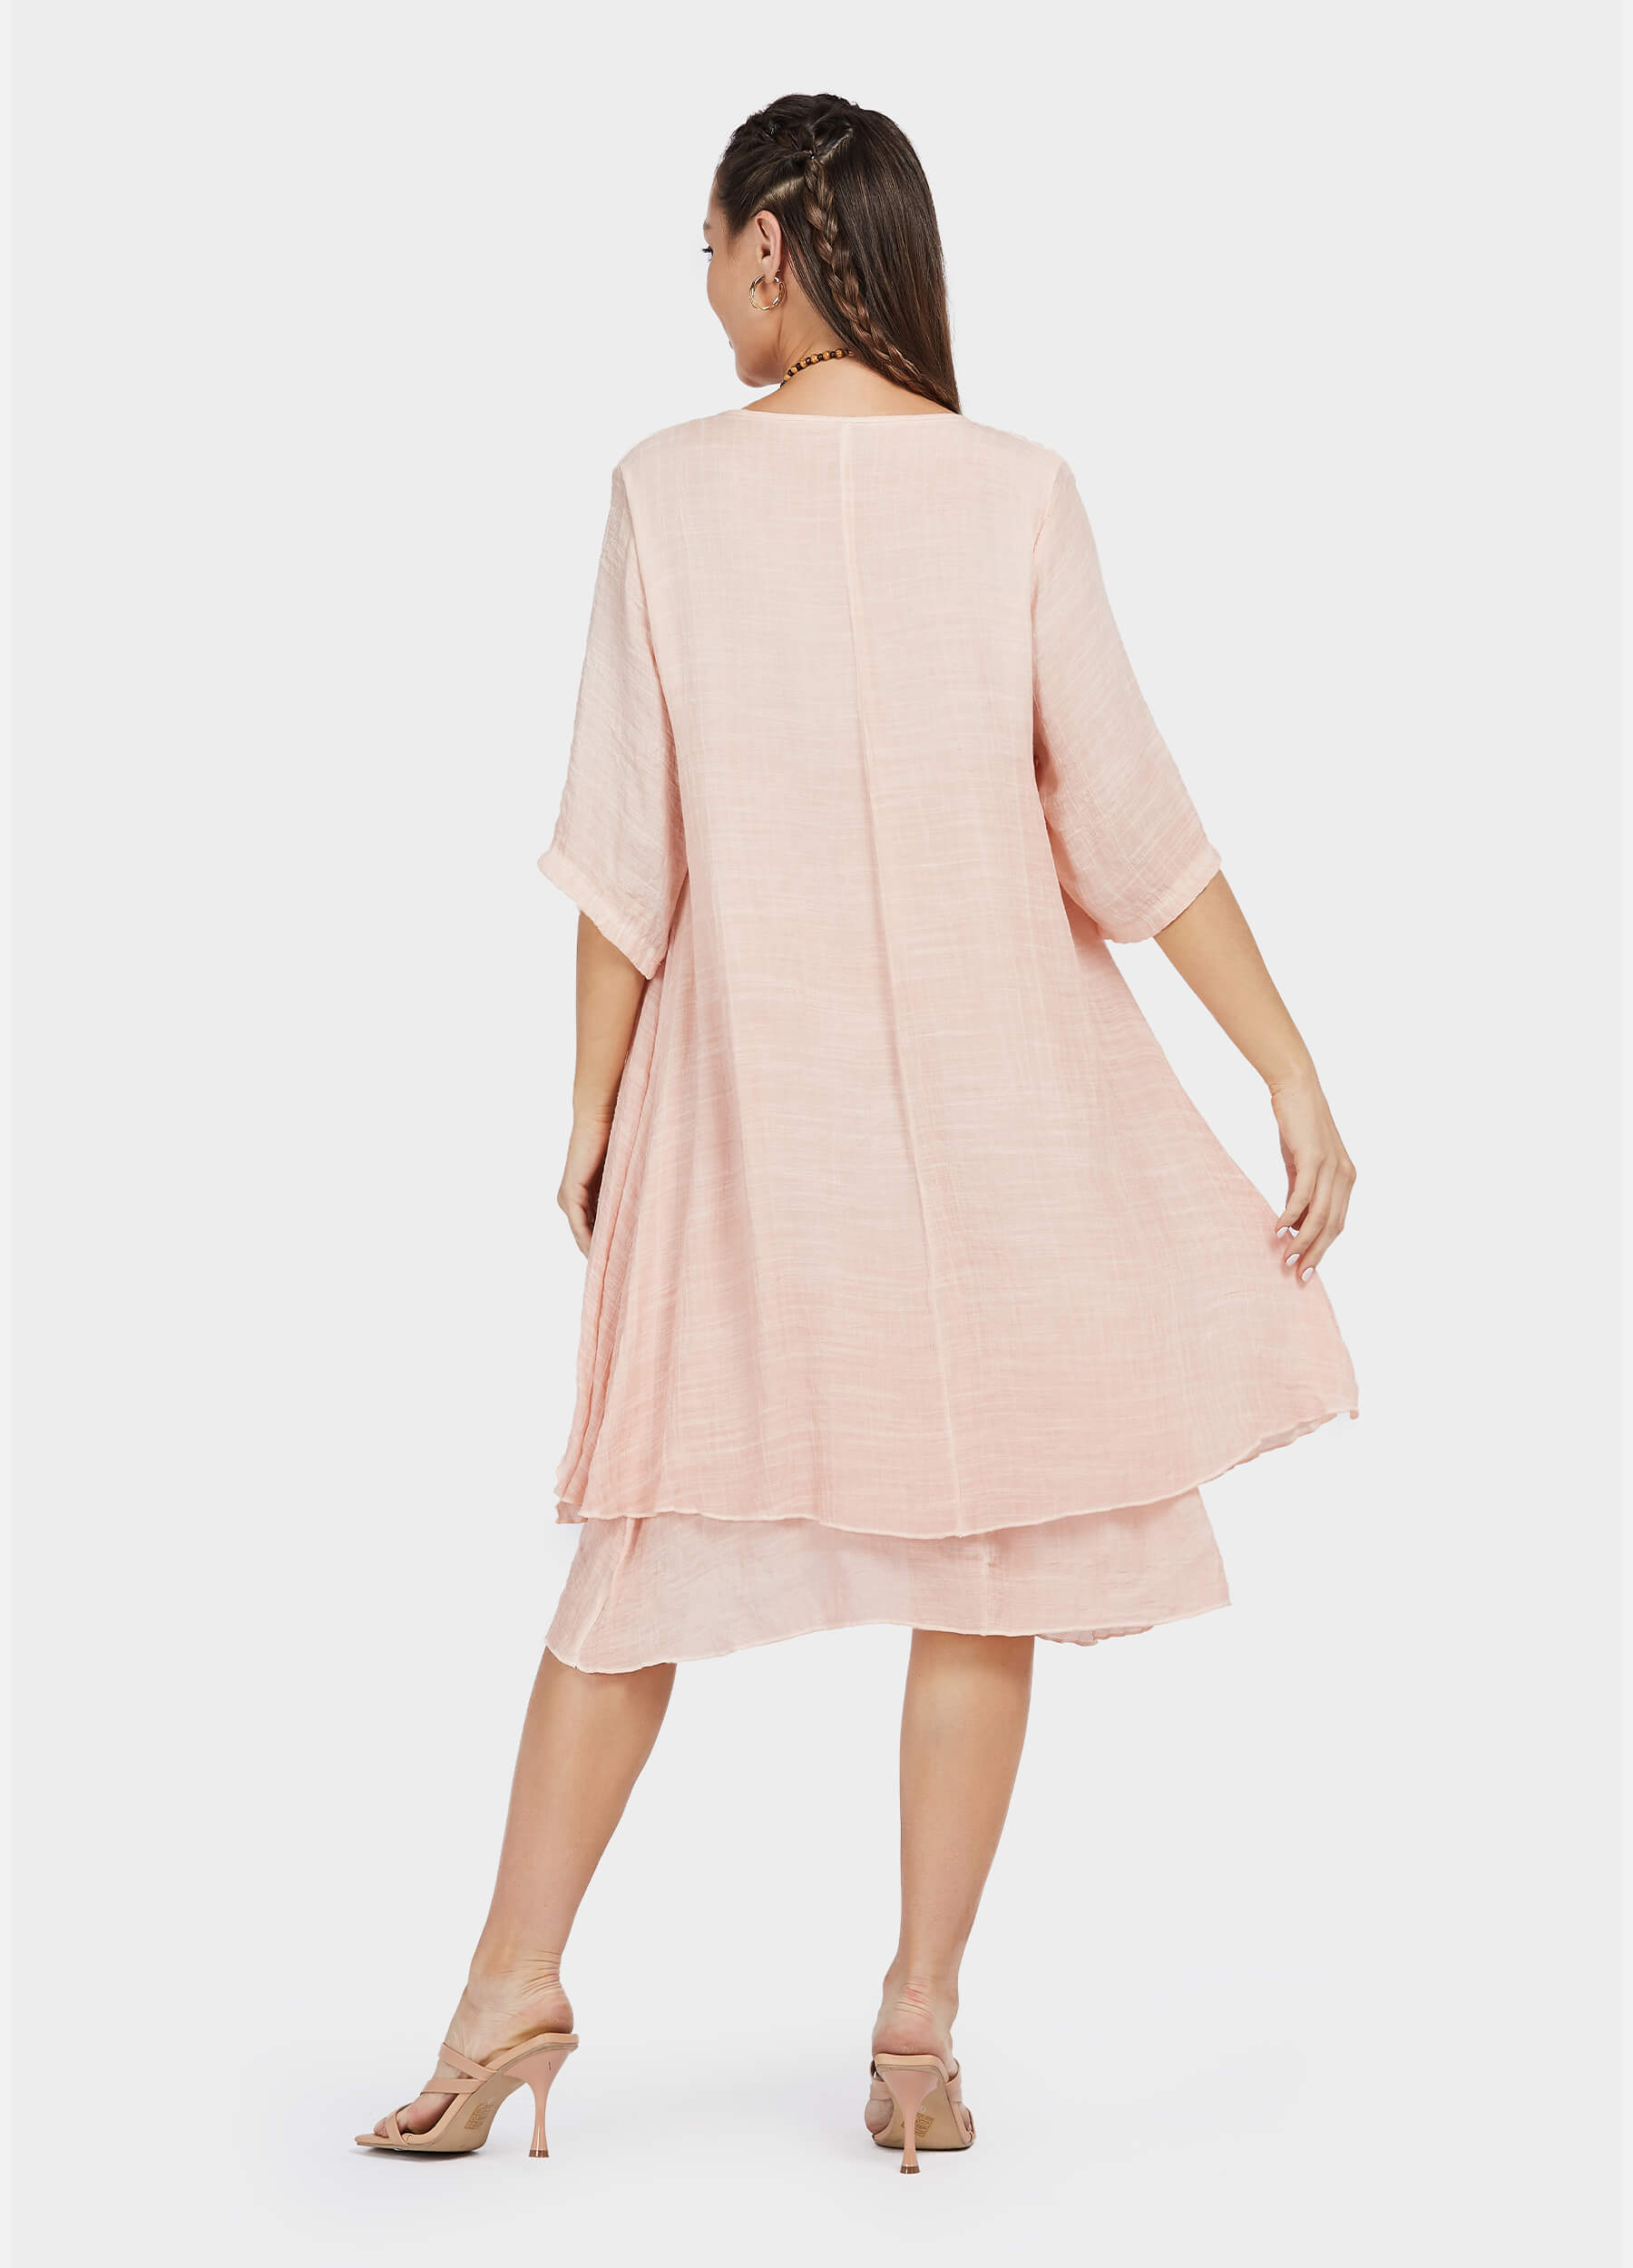 MECALA Women's Pink Cardigan Dress with Wooden Feather Necklace